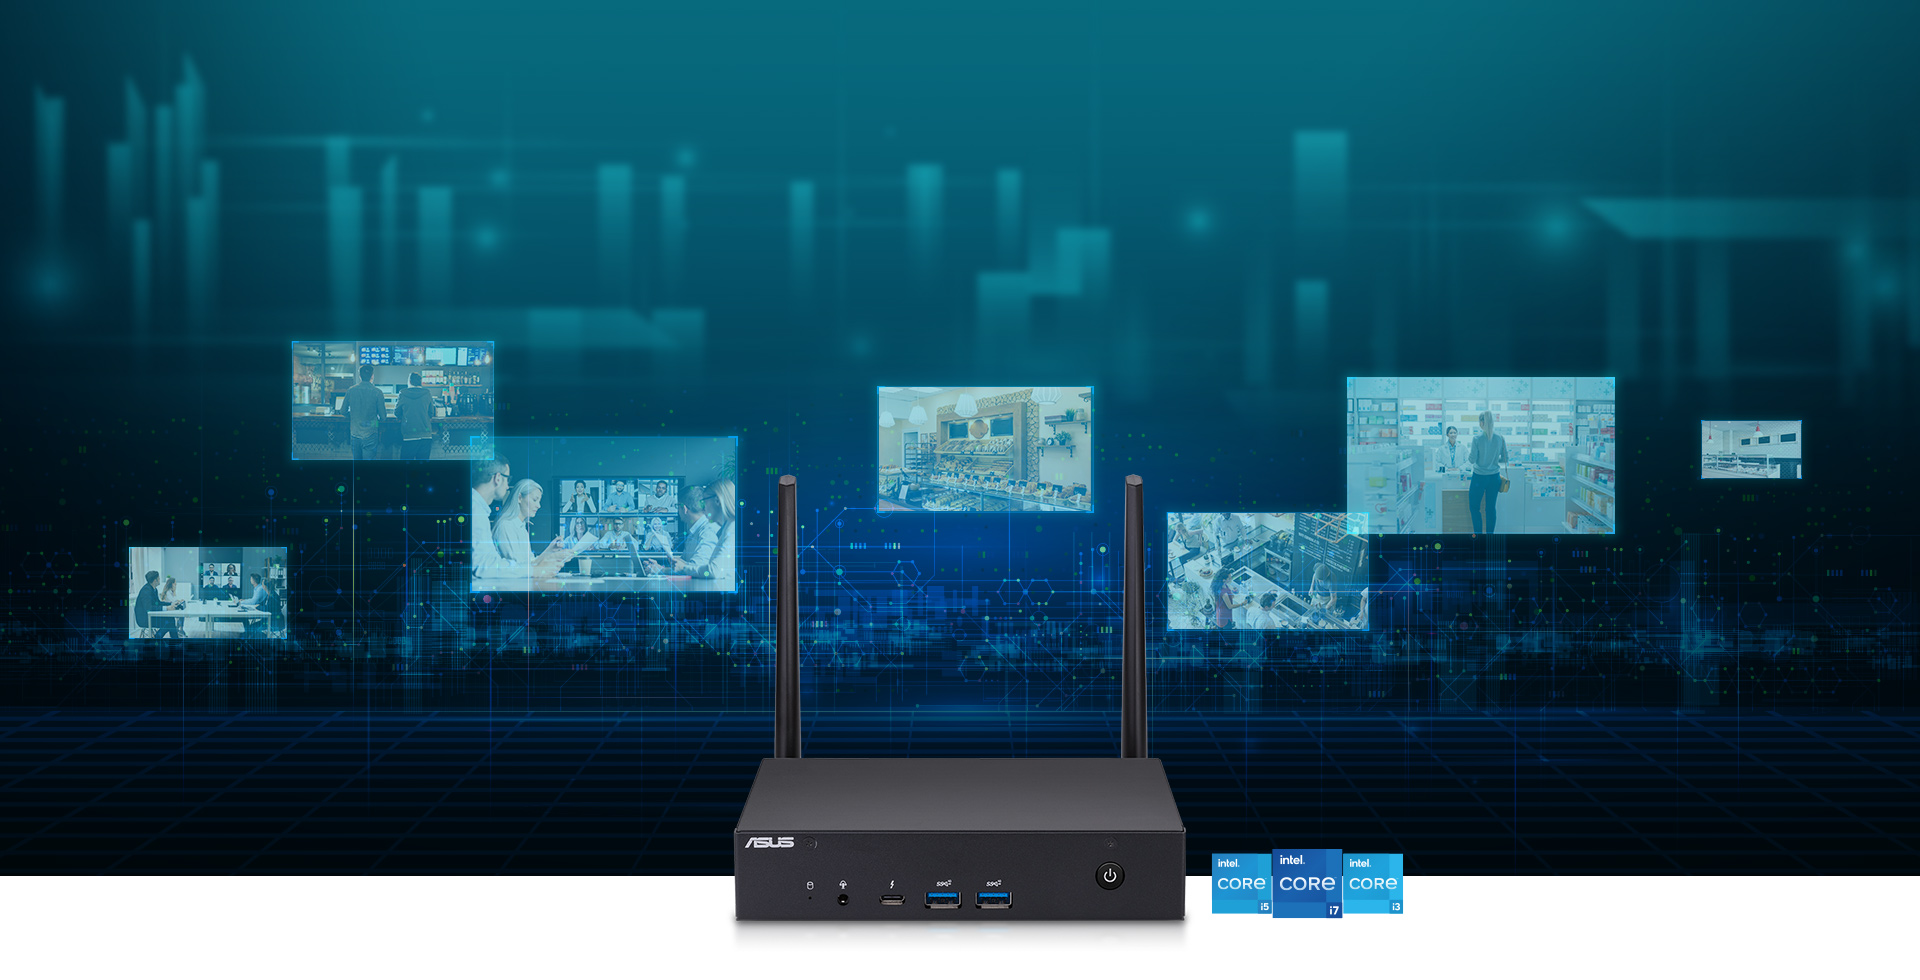 Ultracompact mini PC with rich connectivity features, designed for diversified industrial applications